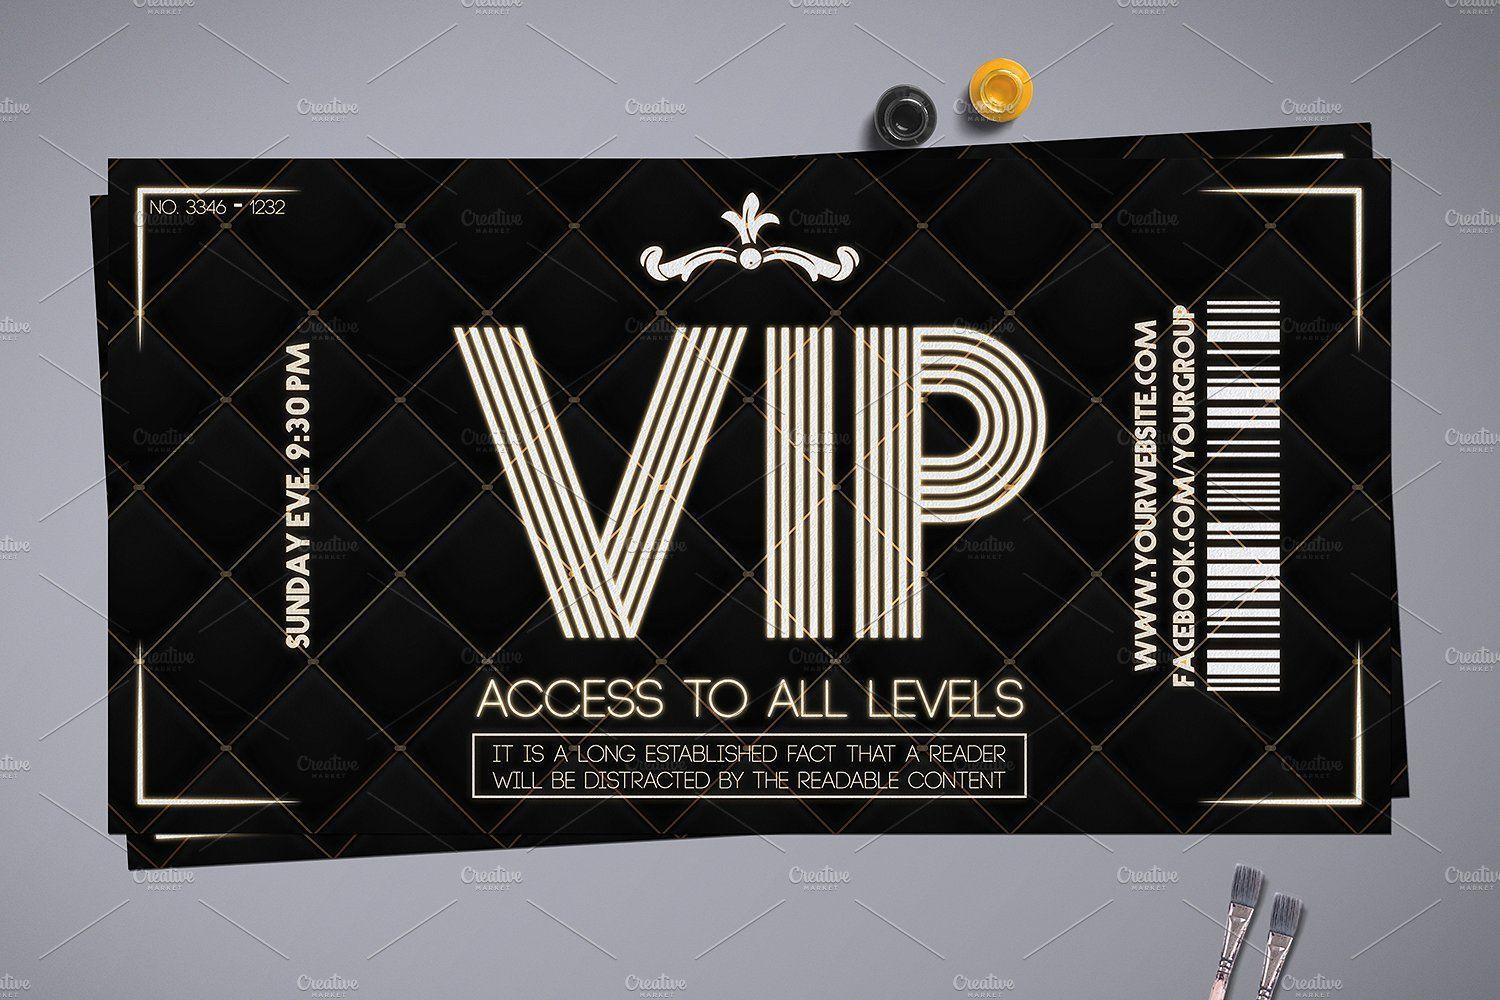 Luxury VIP Pass Card #photos#wallpaper#Mock#preview. Background